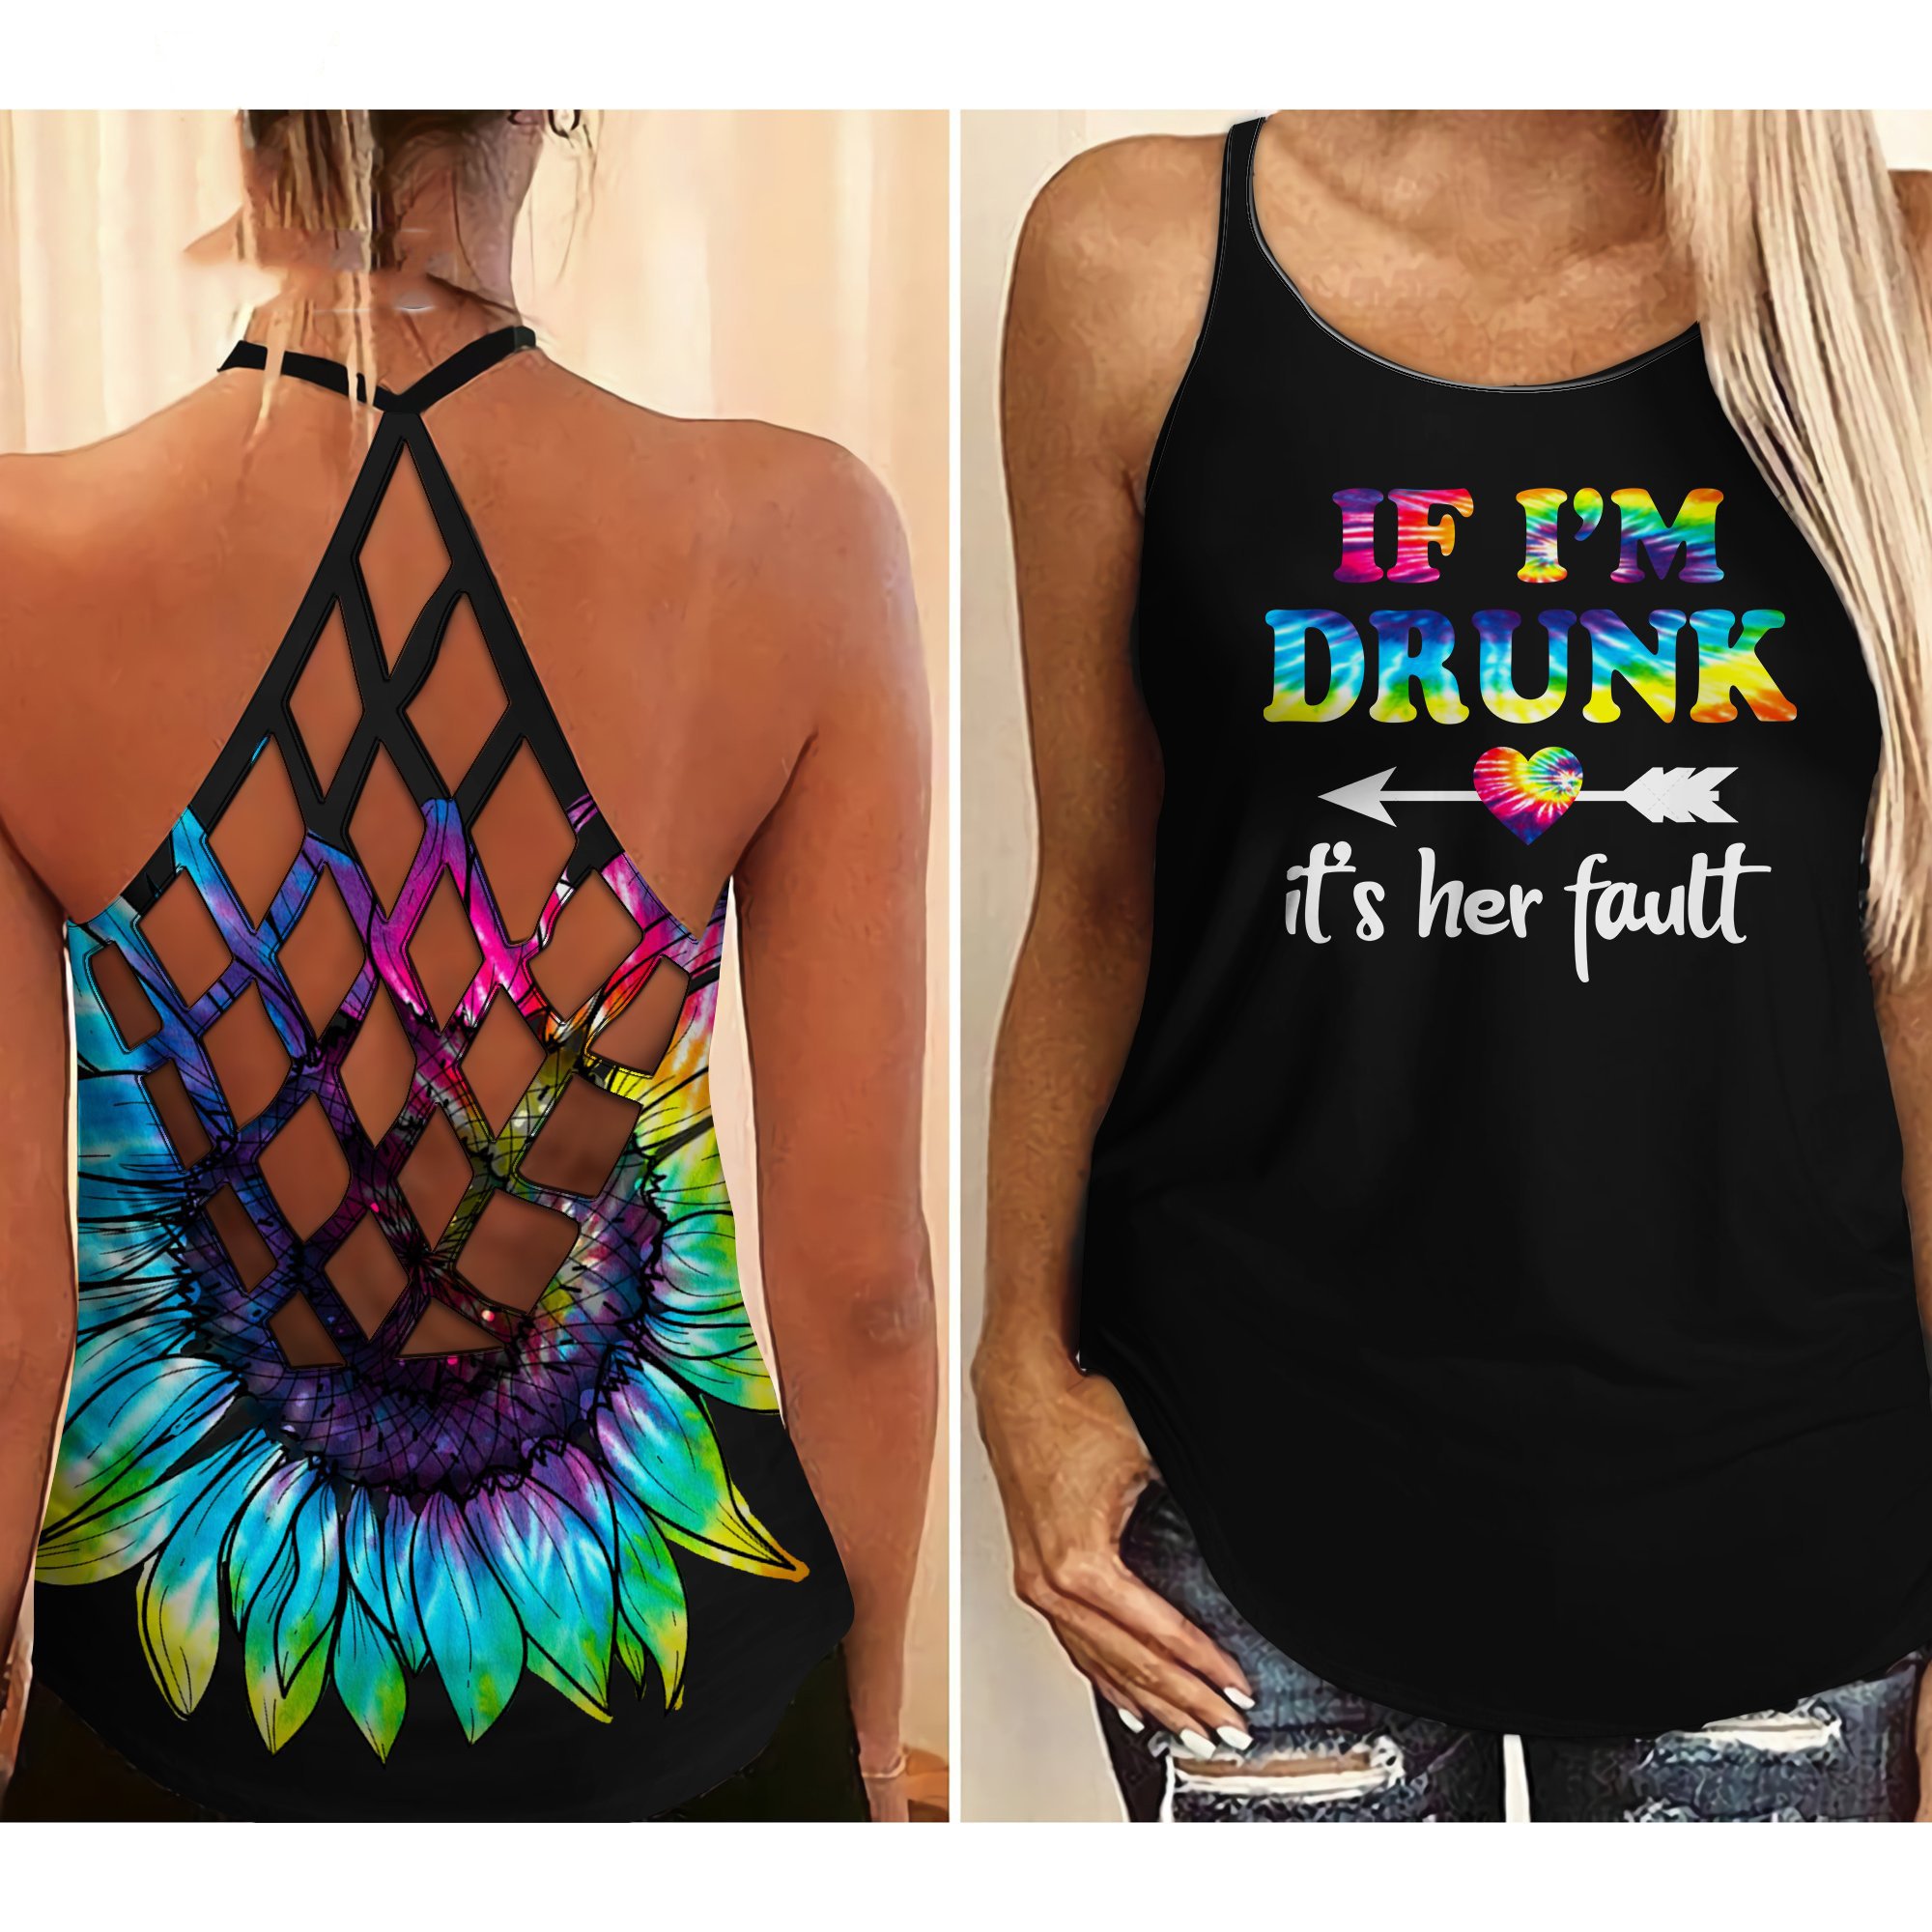 If Im drunk its her fault criss cross open back camisole tank top